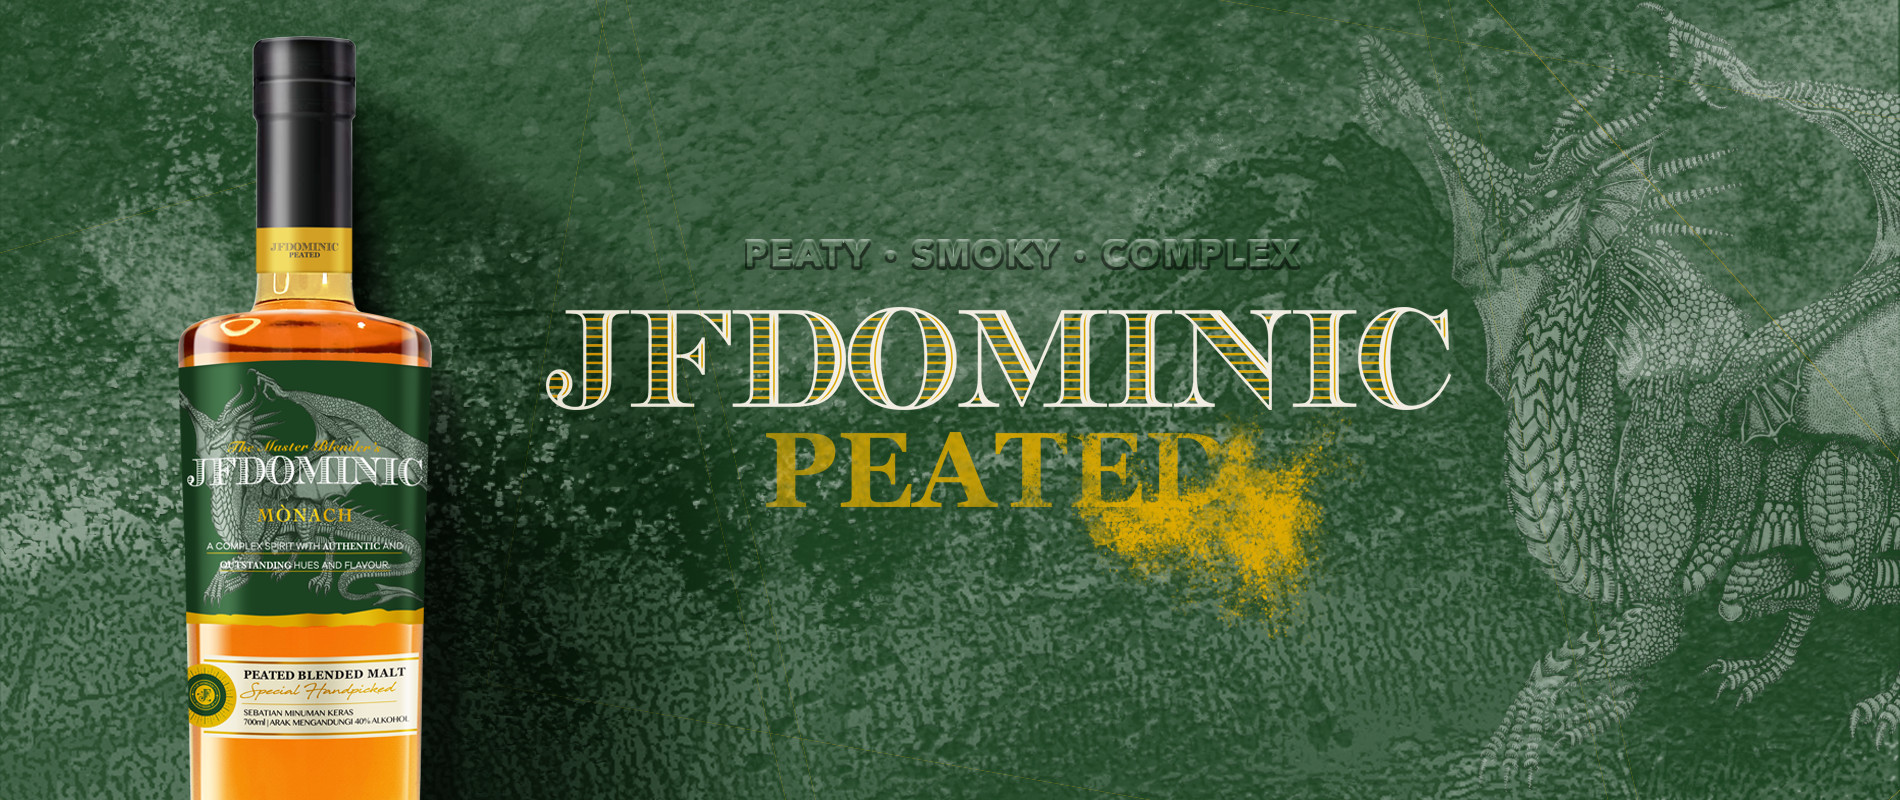 JF Dominic Peated